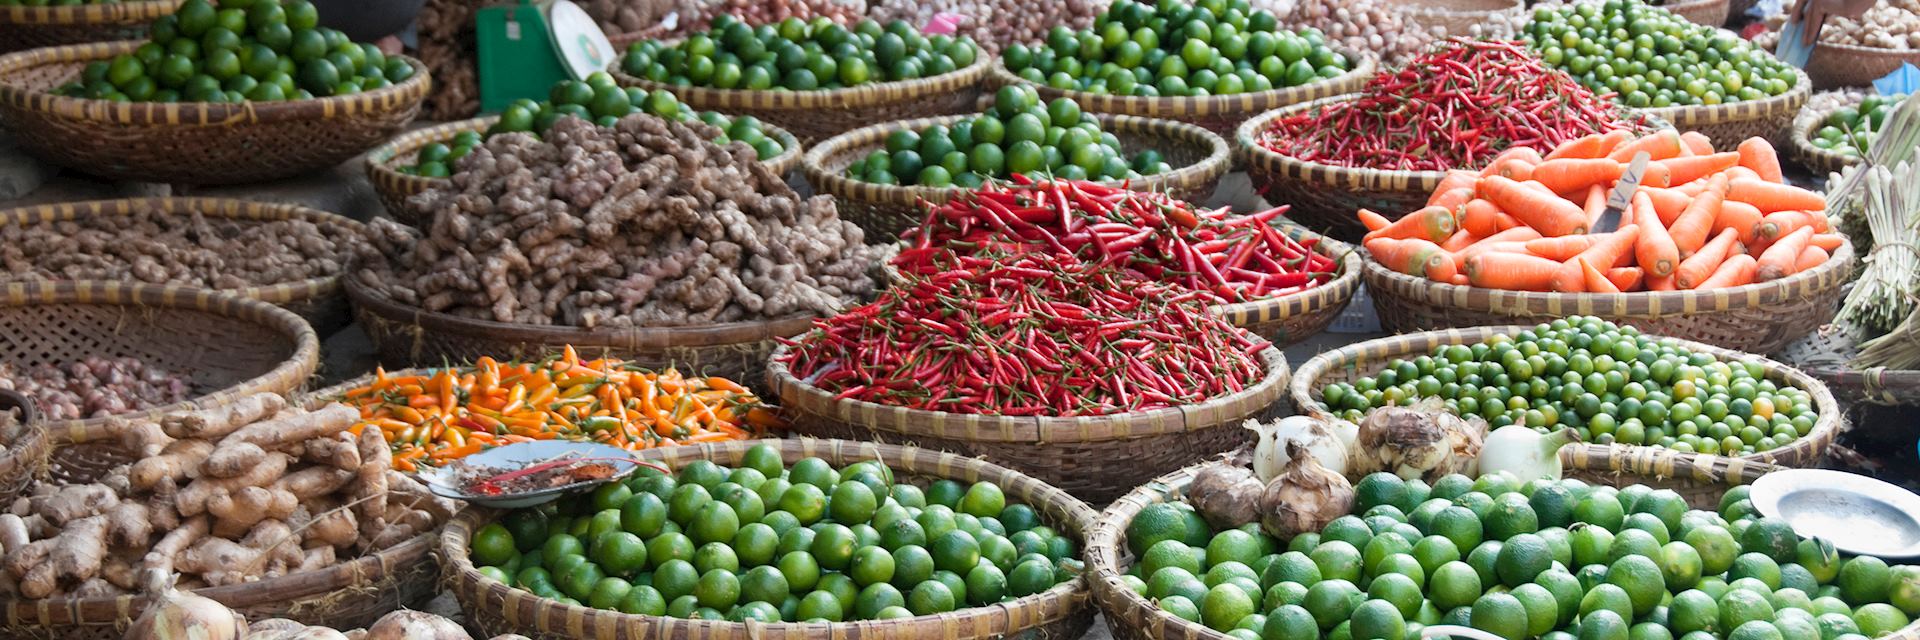 Fruit and vegetables for sale at a street market in Hanoi